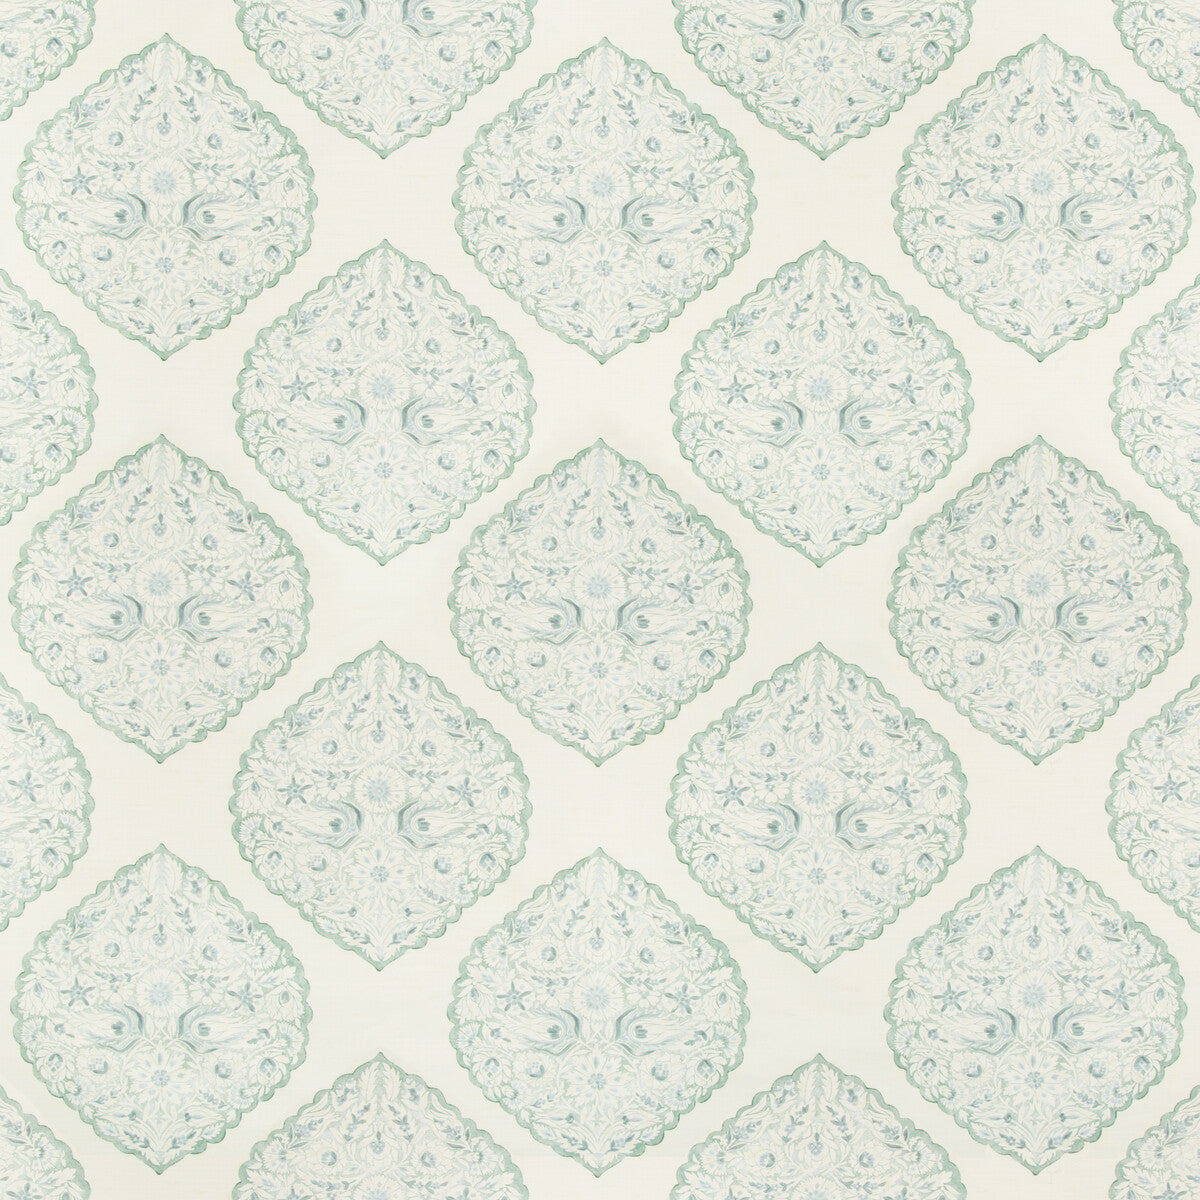 Lido Print fabric in mist color - pattern 2017165.123.0 - by Lee Jofa in the Westport collection